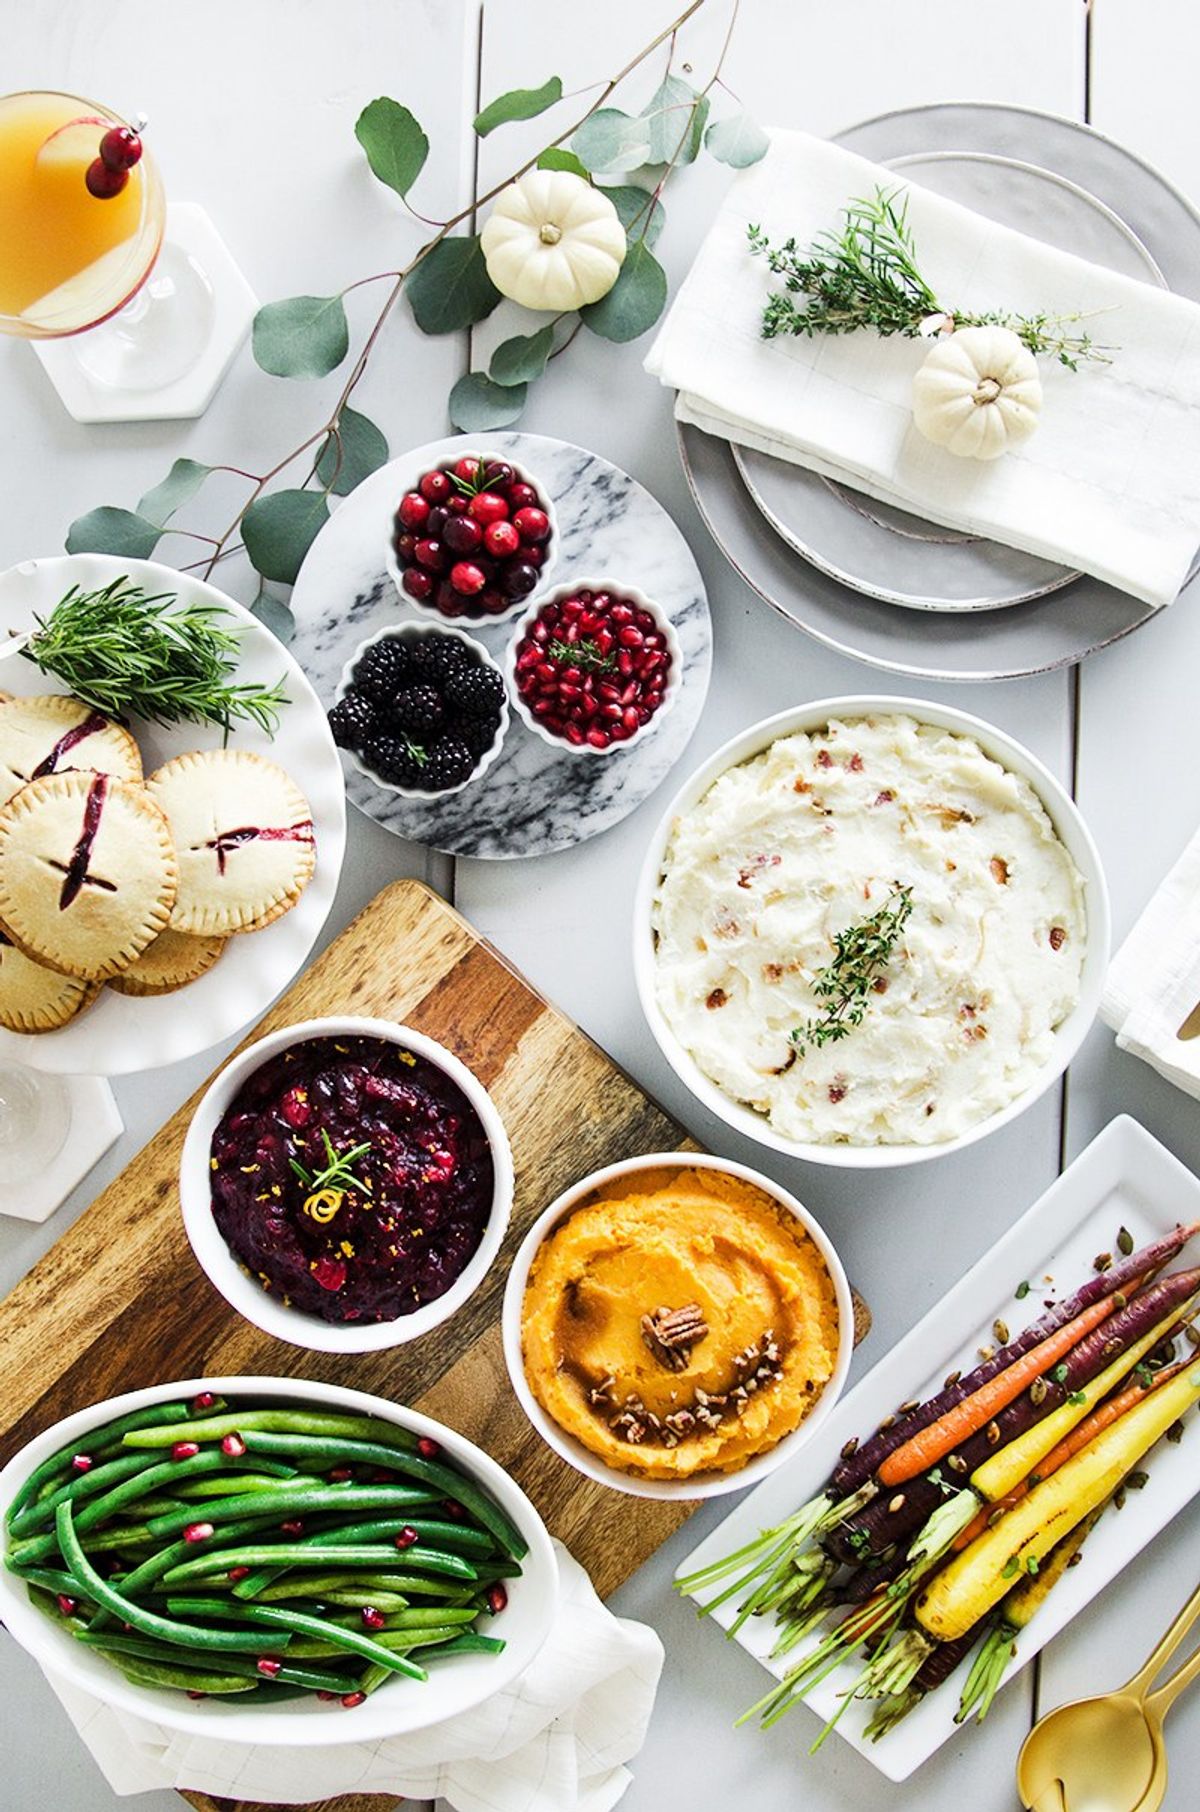 8 Dishes That Will Amaze Your Thanksgiving Guests This Season